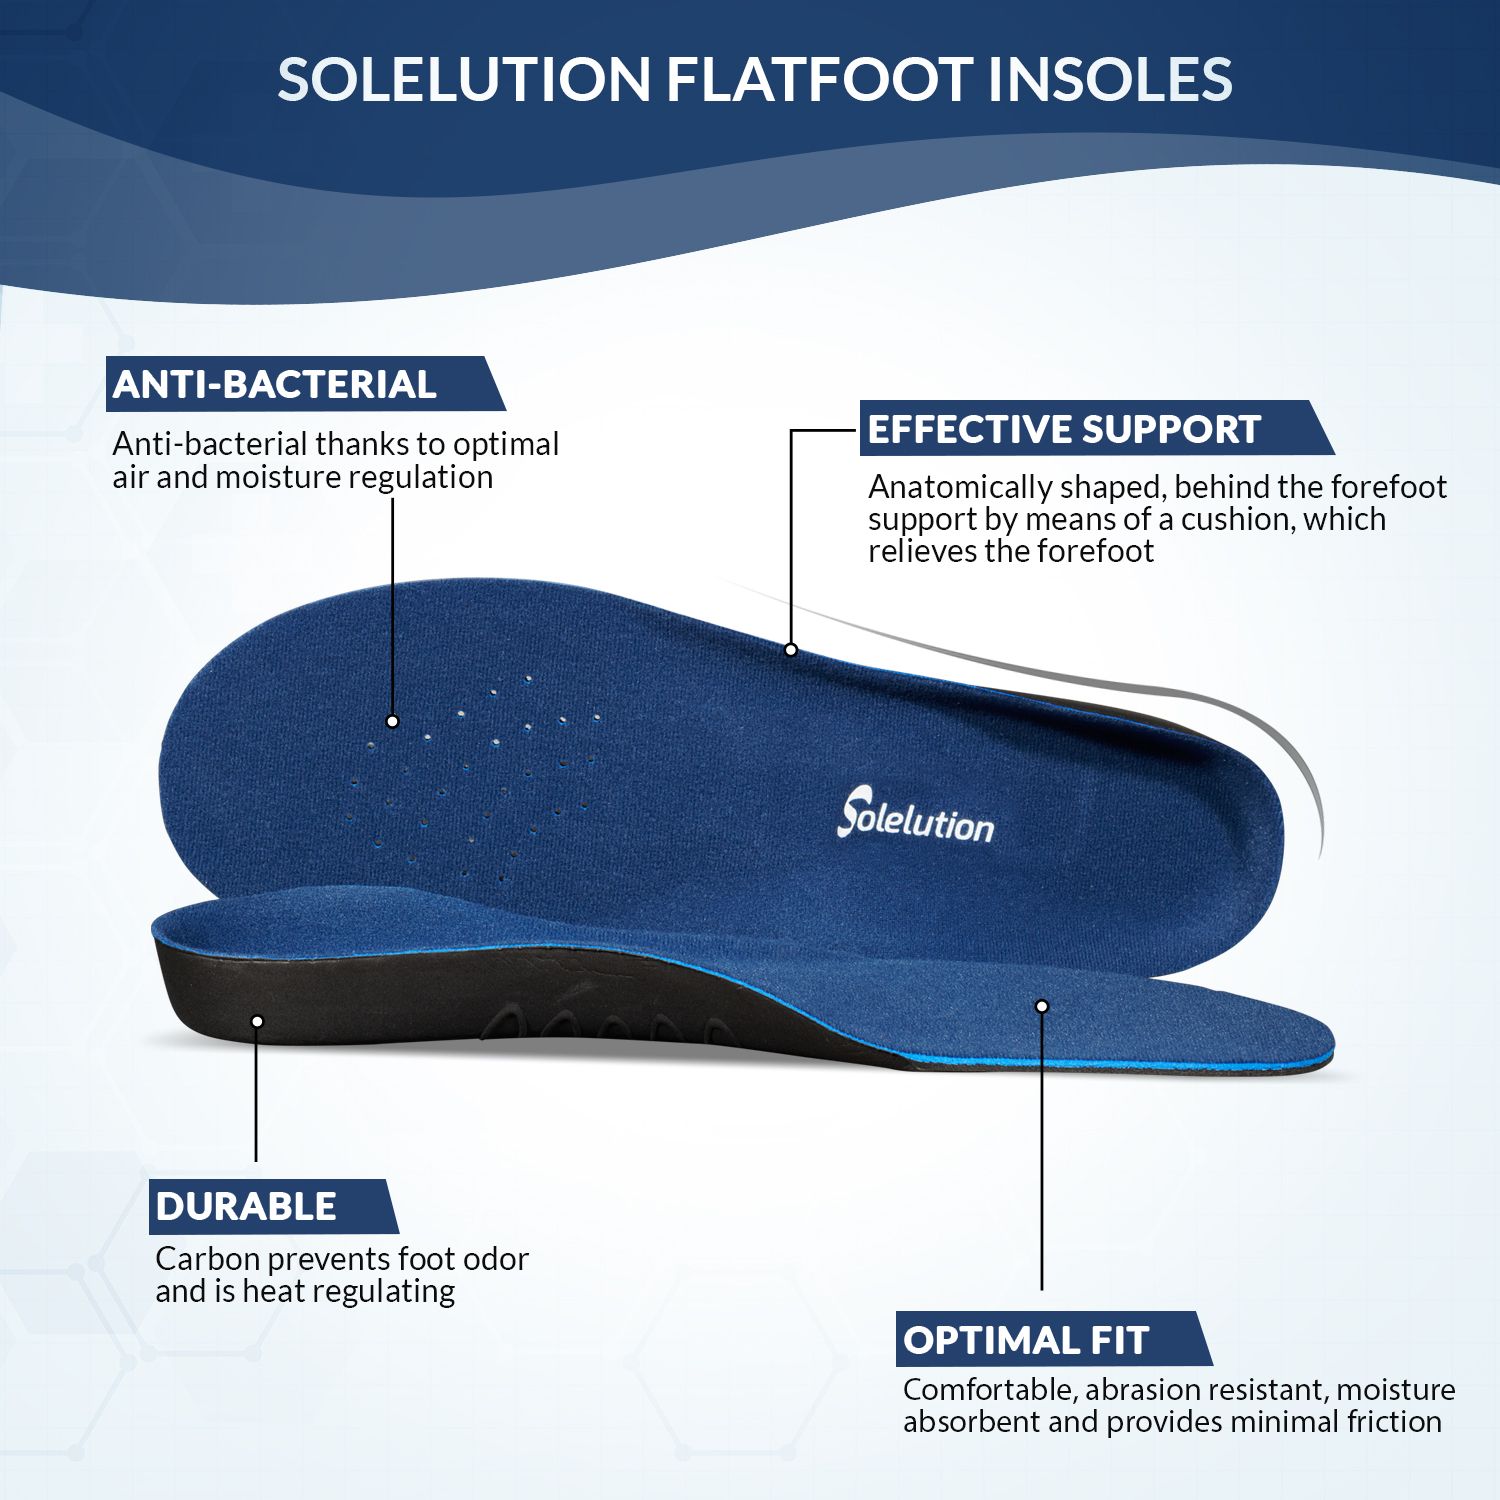 solelution flatfoot insoles specifications